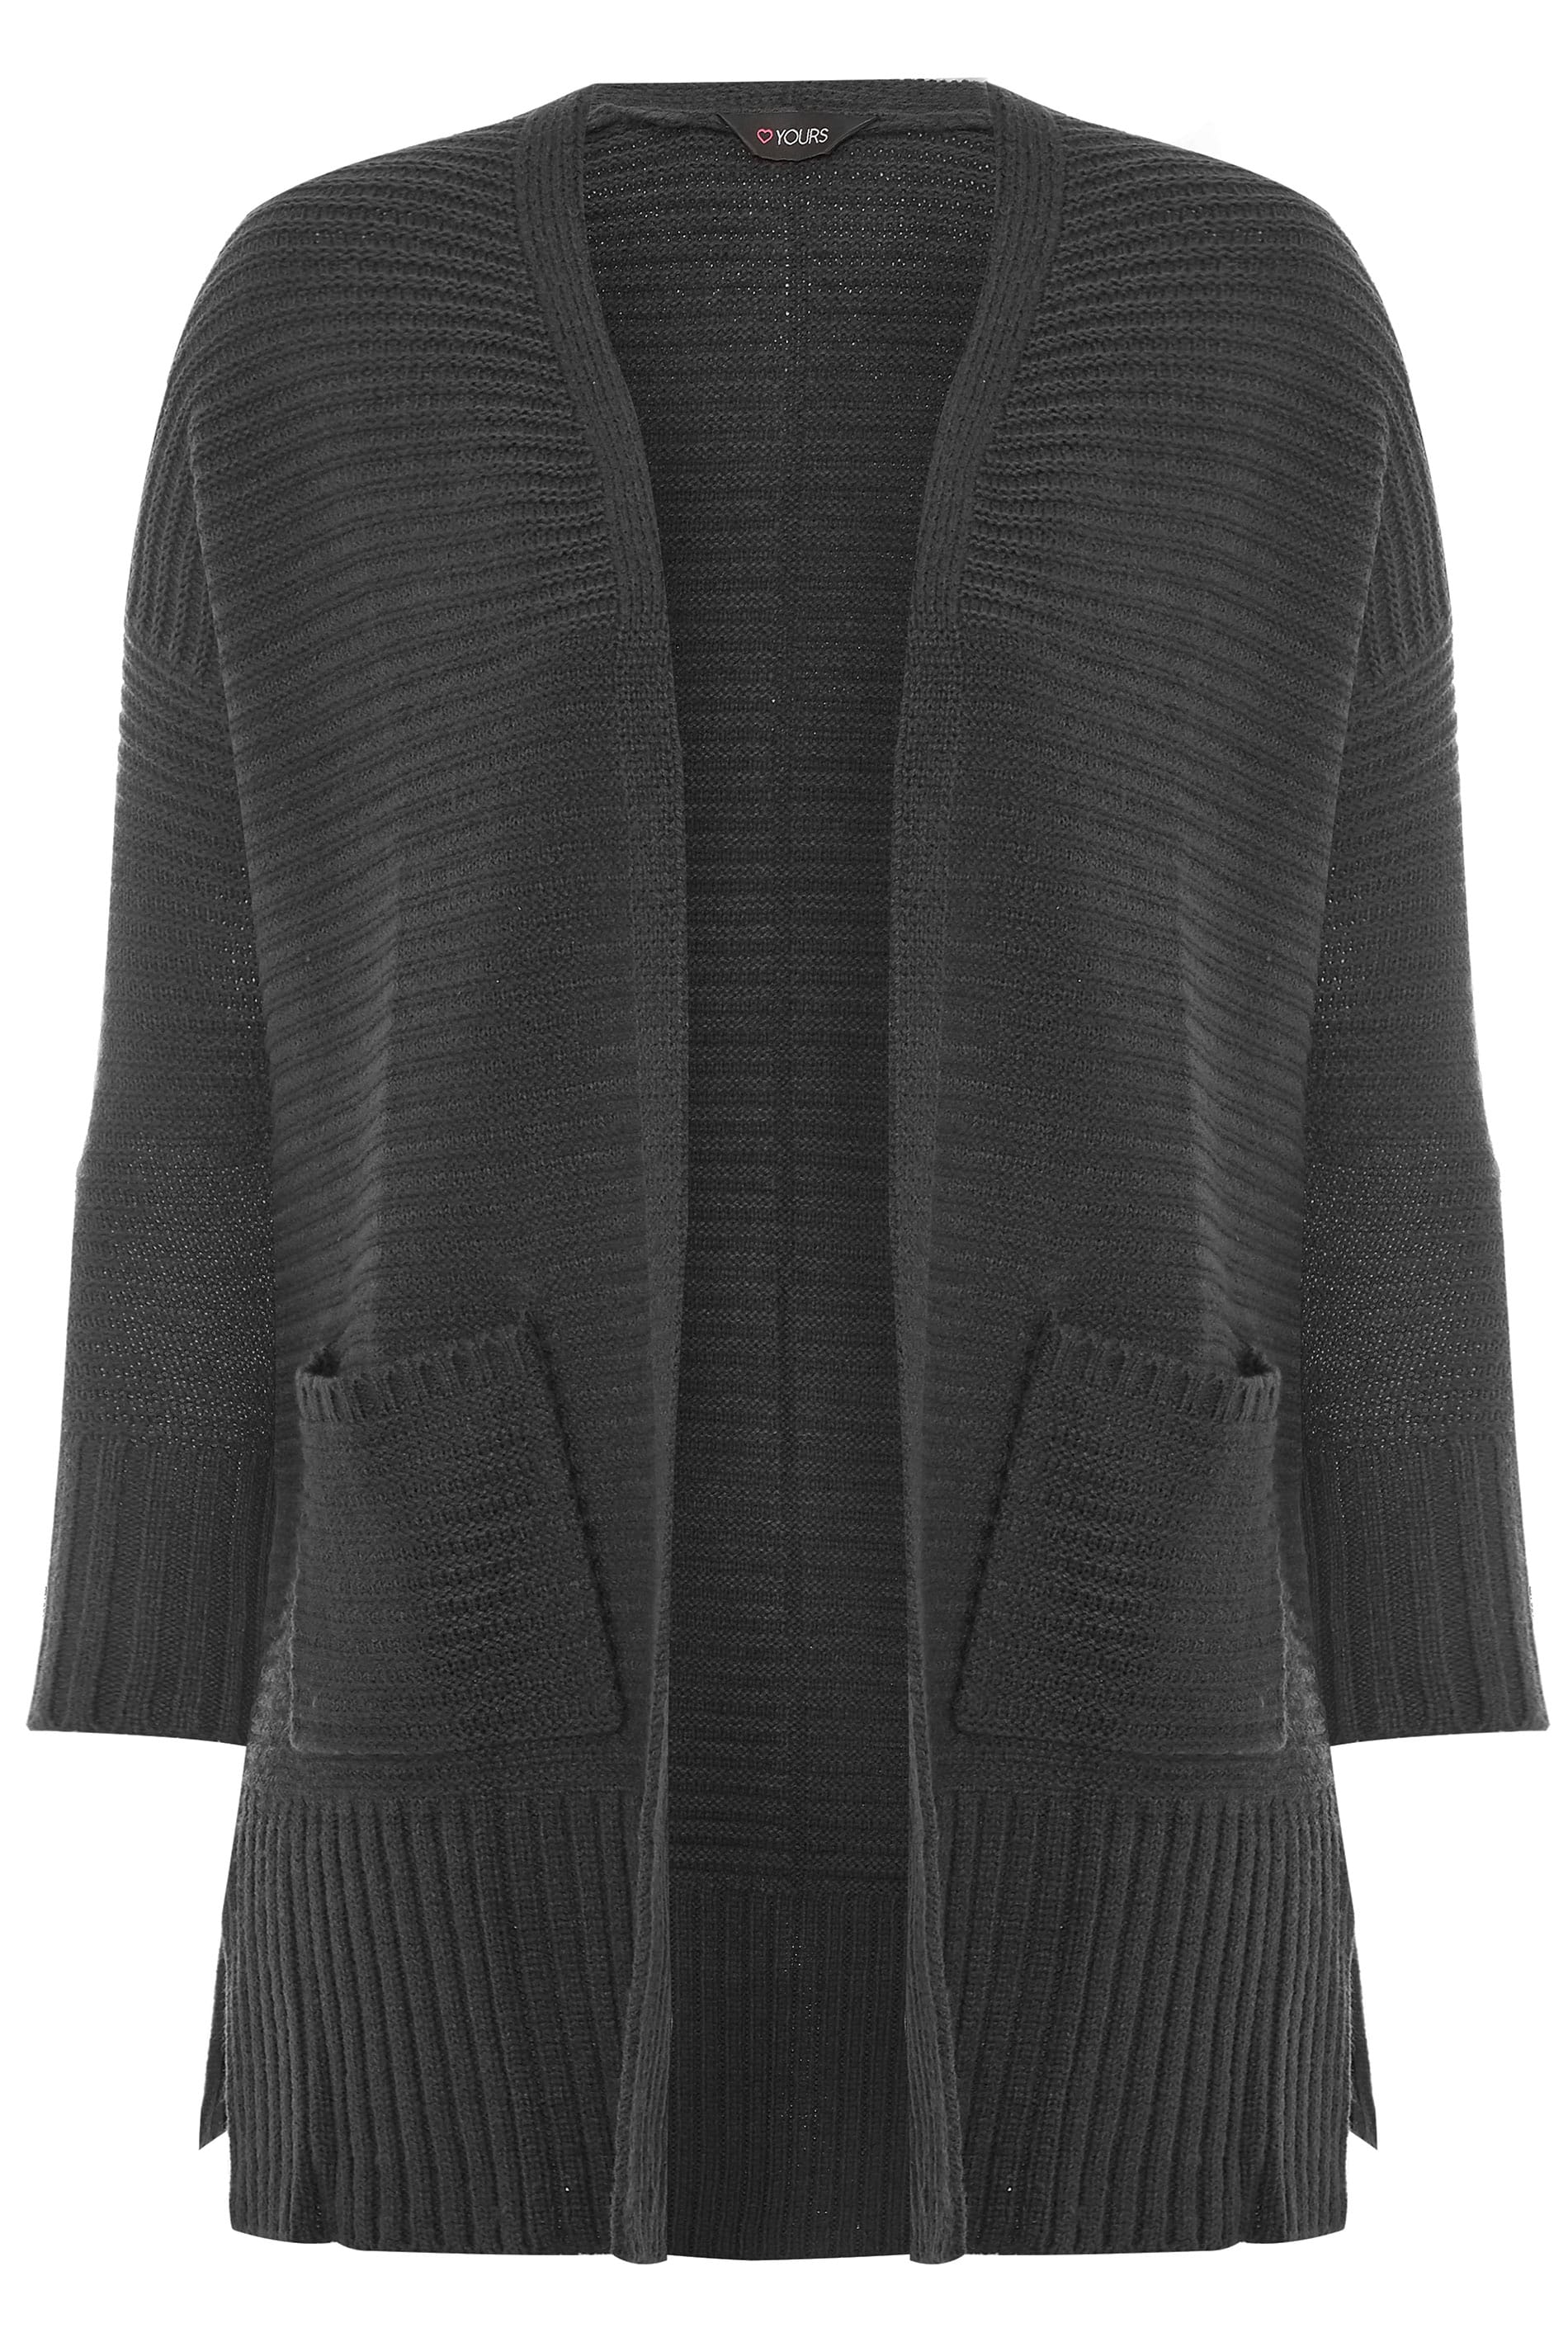 Charcoal Grey Ribbed Cardigan | Yours Clothing